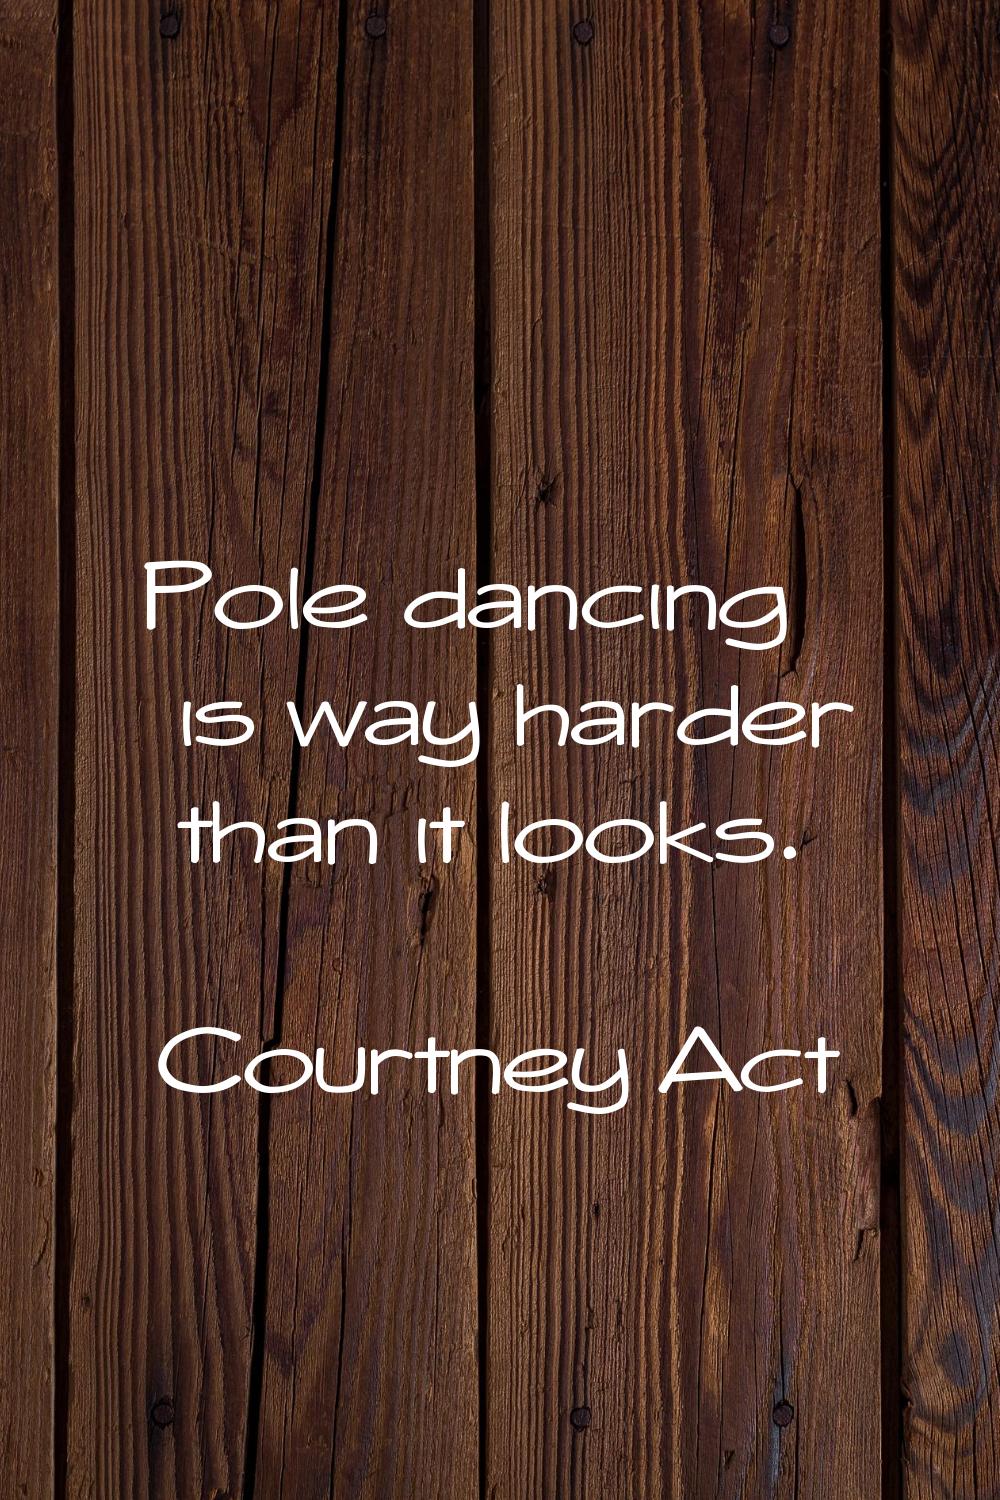 Pole dancing is way harder than it looks.